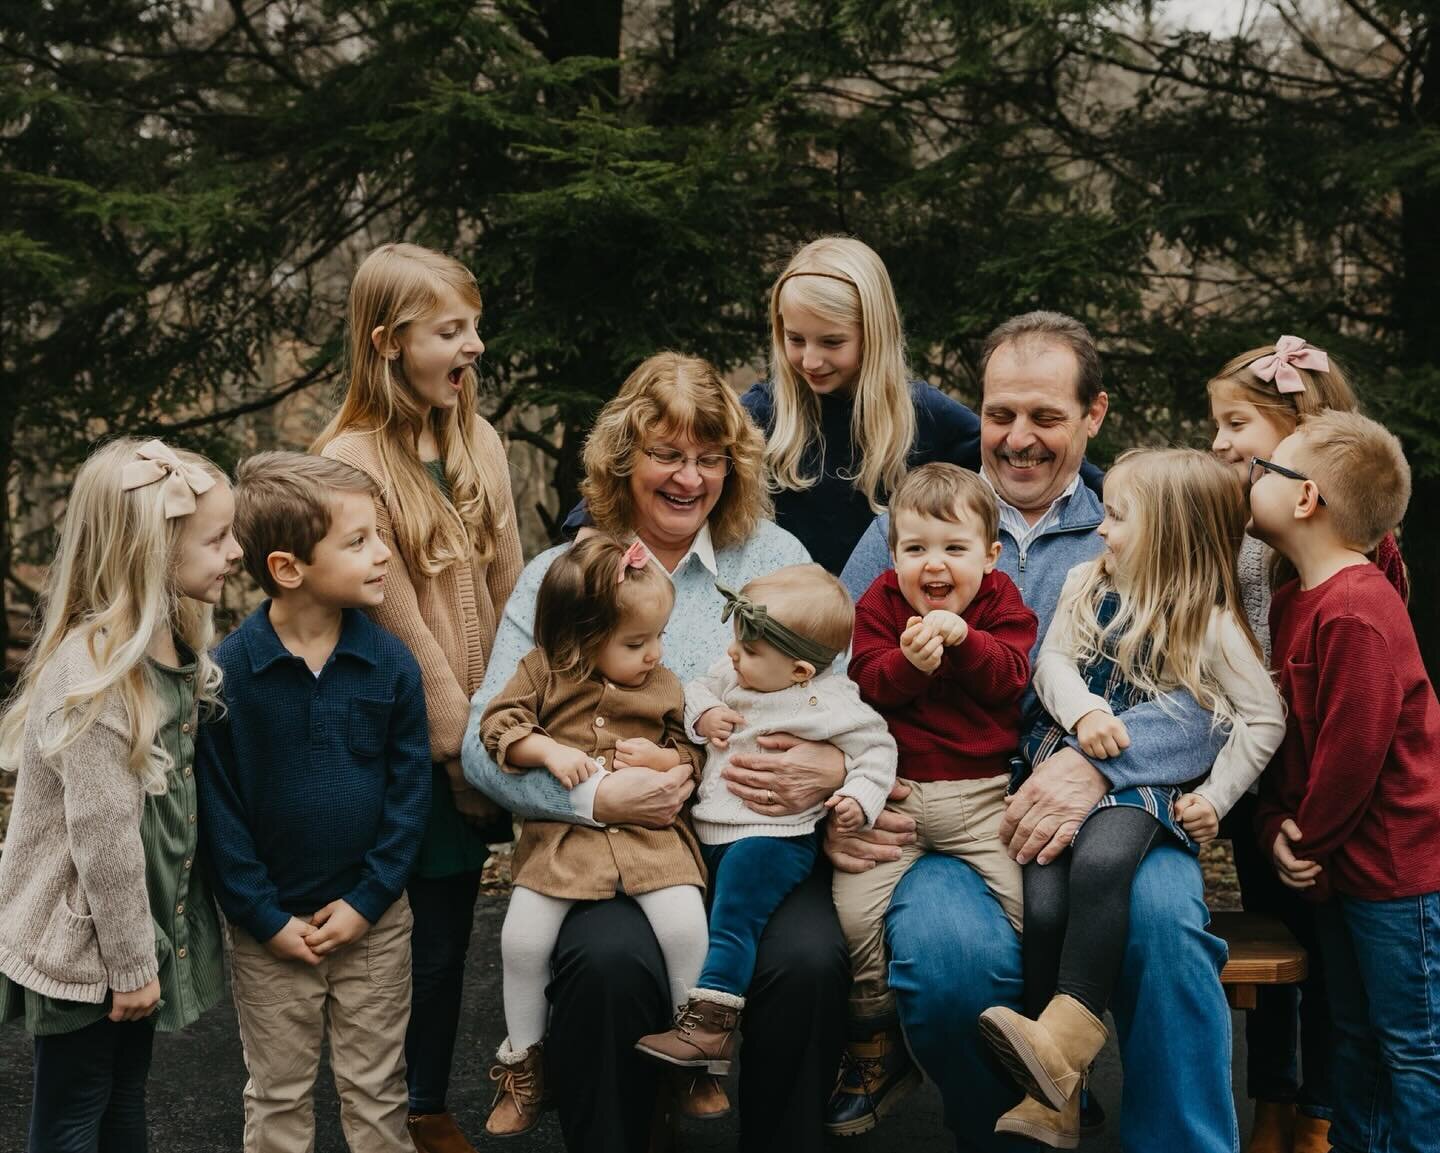 Another fun family session in the books!! We had so much fun and laughed way too hard. Listen, even the behind the scenes images from this session are worth seeing. Picture 12 adults trying to get 10 kids to look at the camera and smile (at the same 